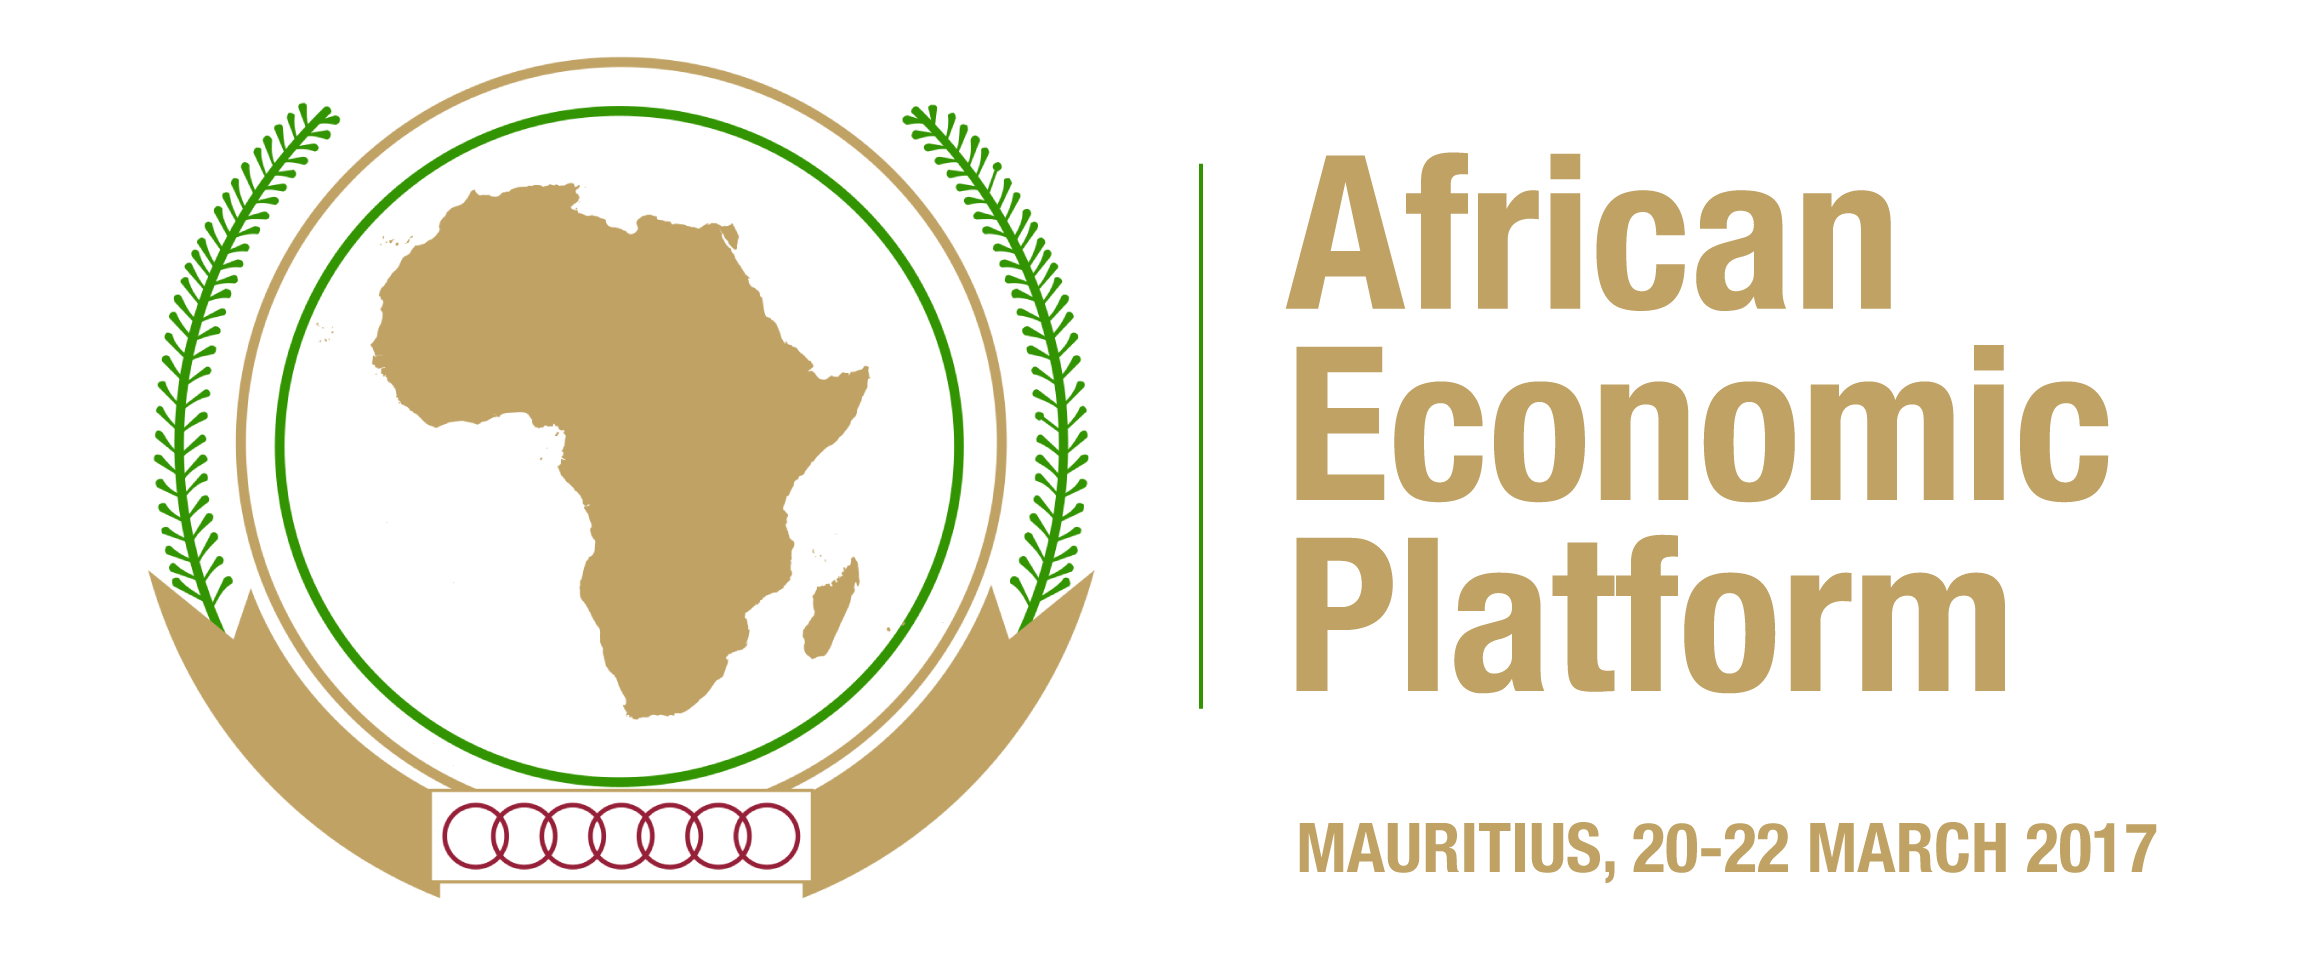 African Union Logo - African Union Foundation Profile | African Union